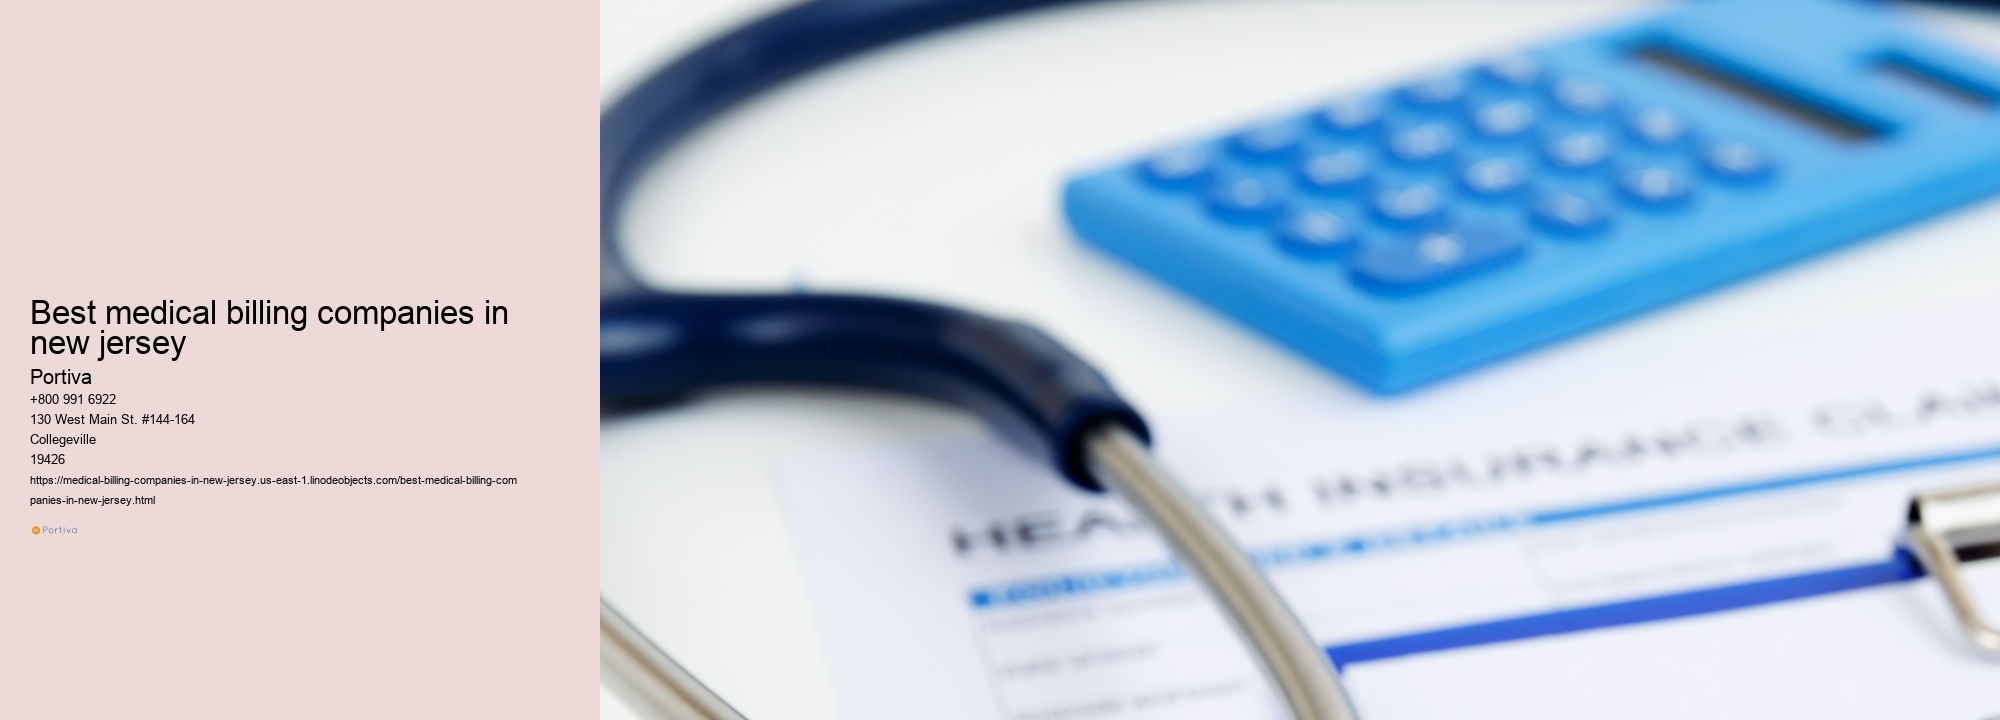 best medical billing companies in new jersey